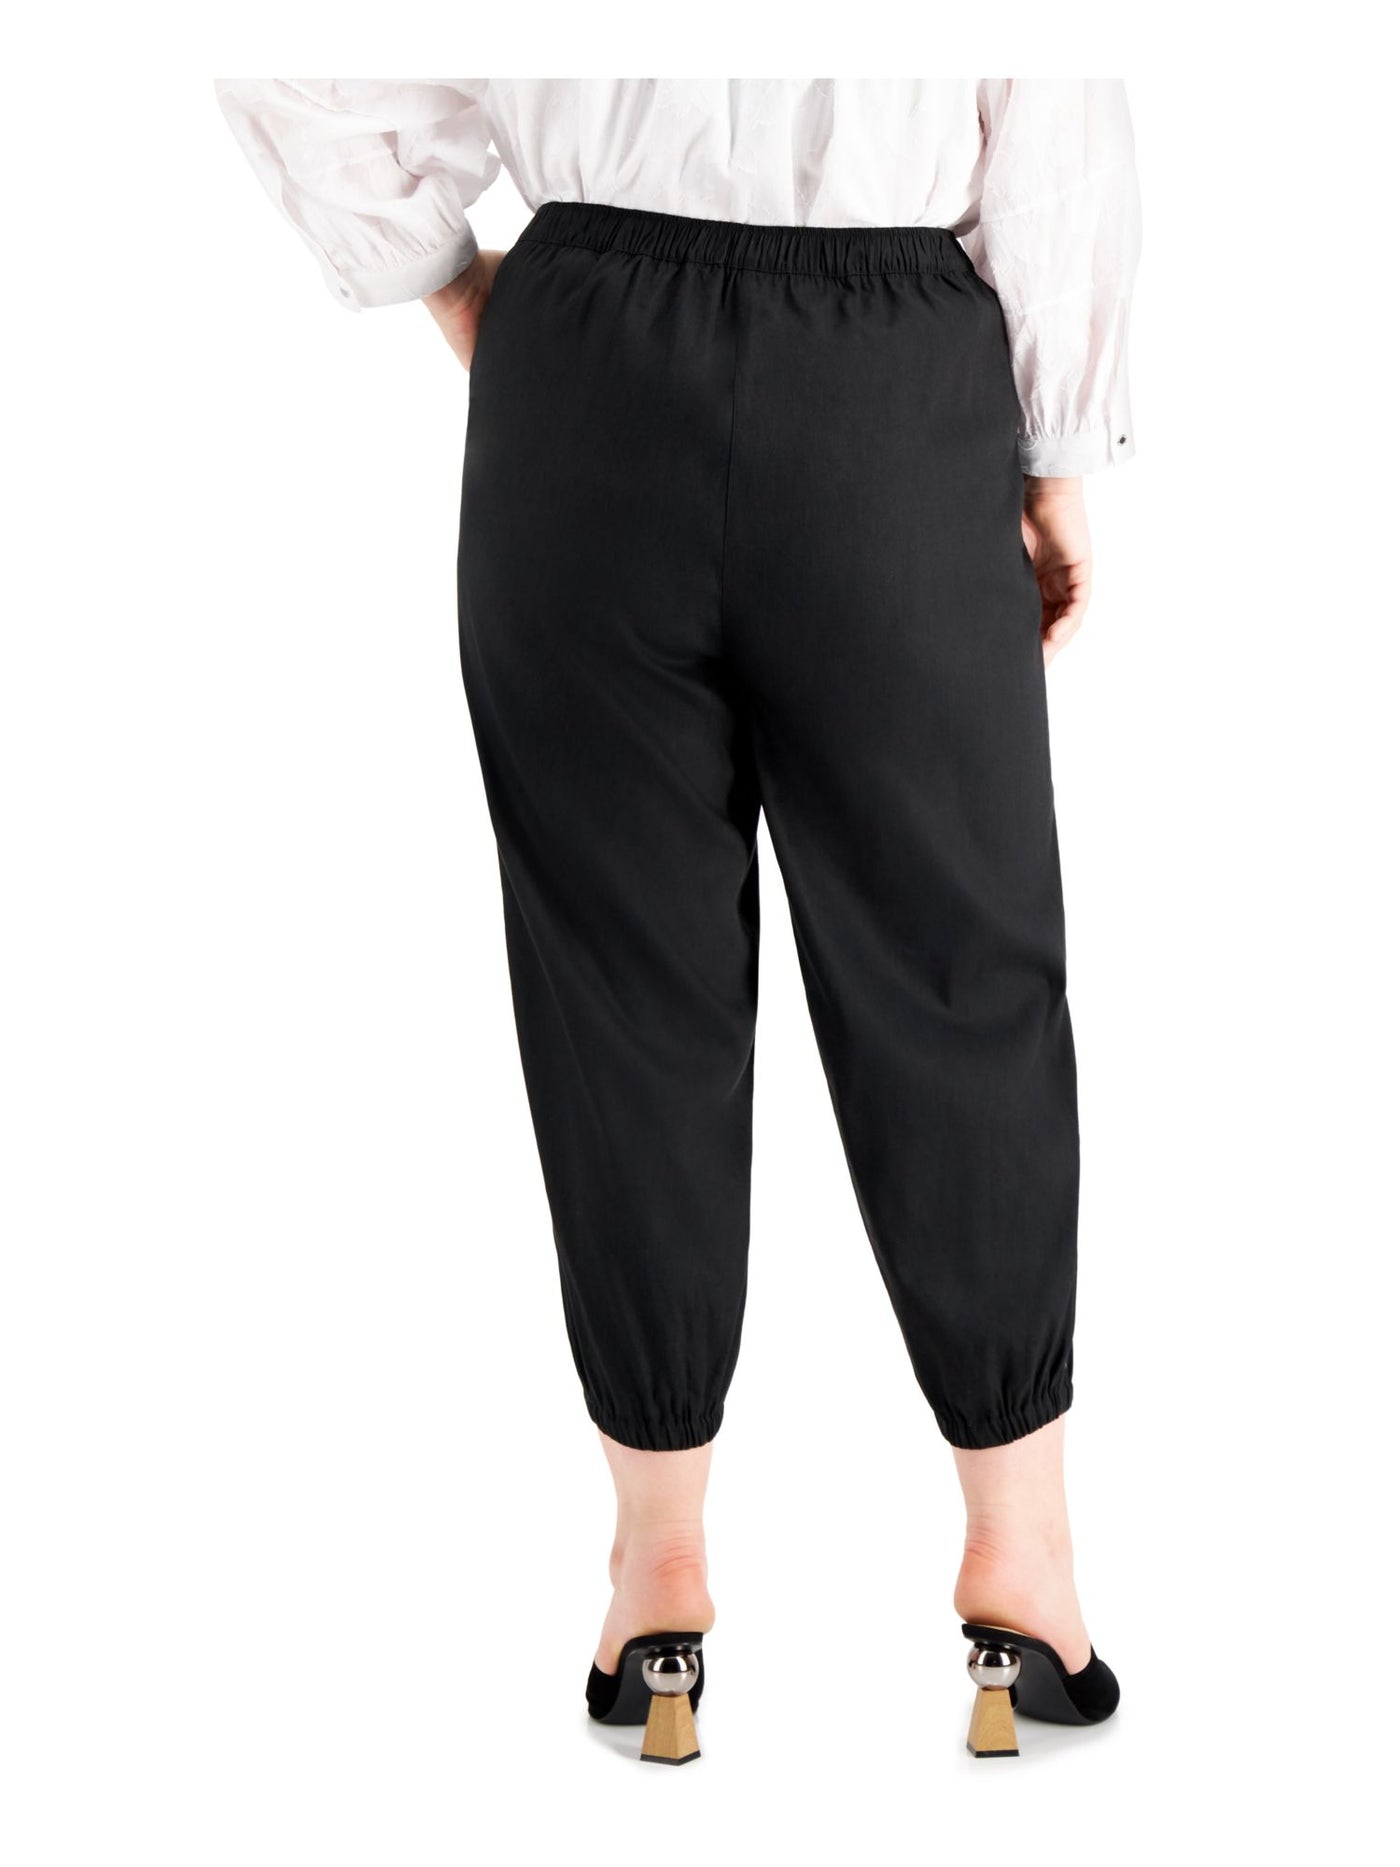 CALVIN KLEIN Womens Black Tie Pocketed Faux Front Fly Wear To Work High Waist Pants Plus 2X